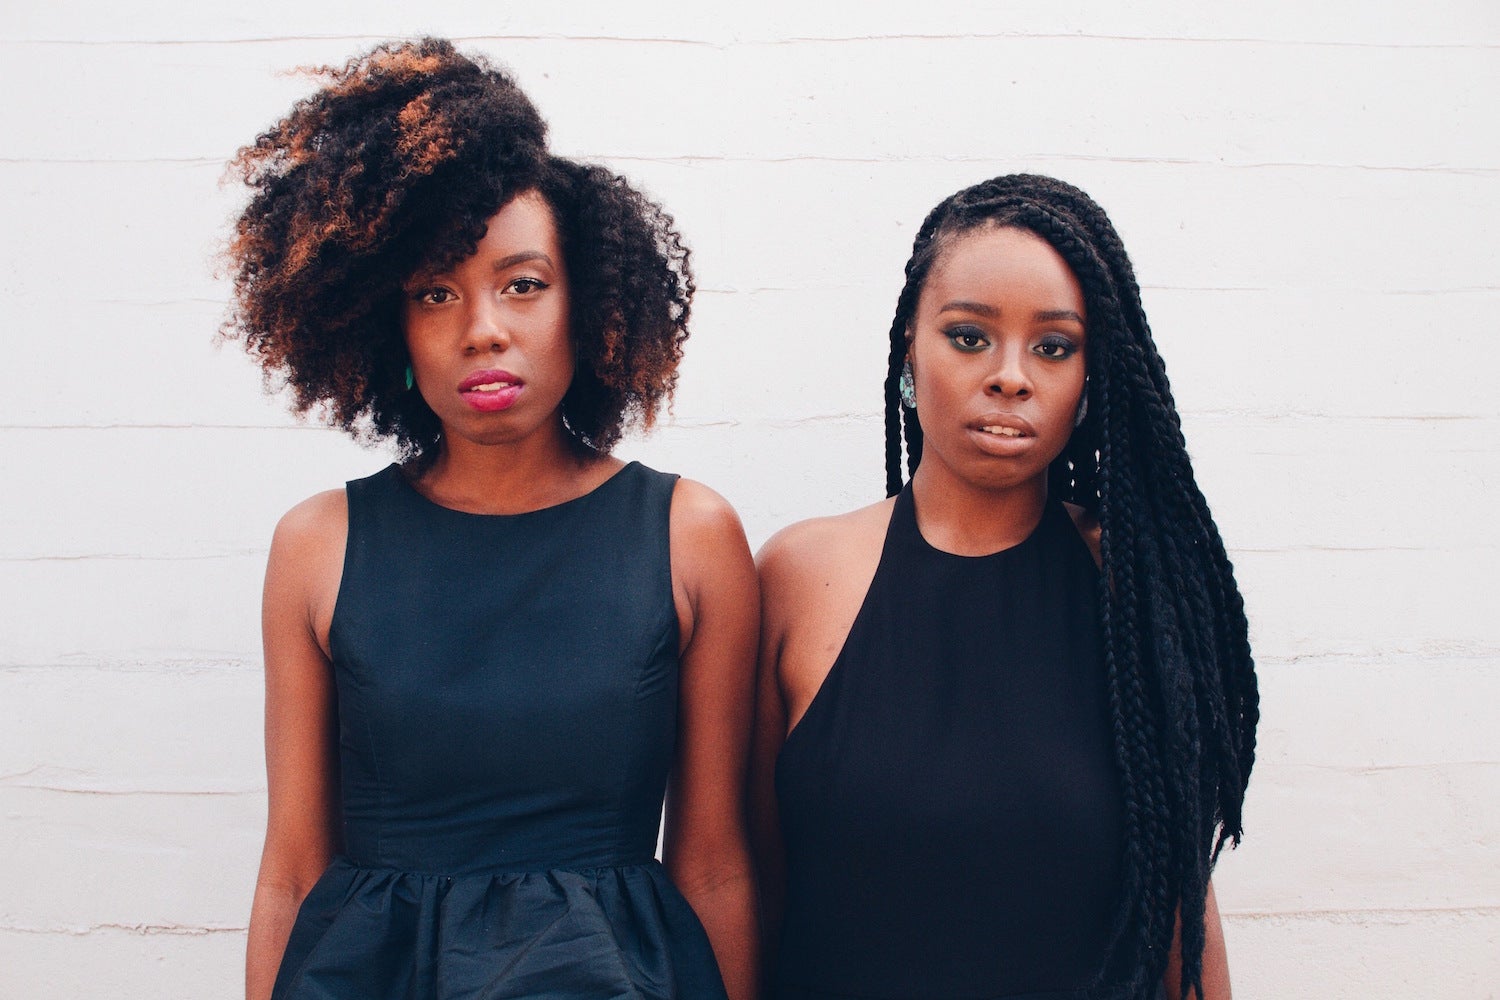 Founder of New Natural Hair Magazine Dishes on Her Hustle in The Industry